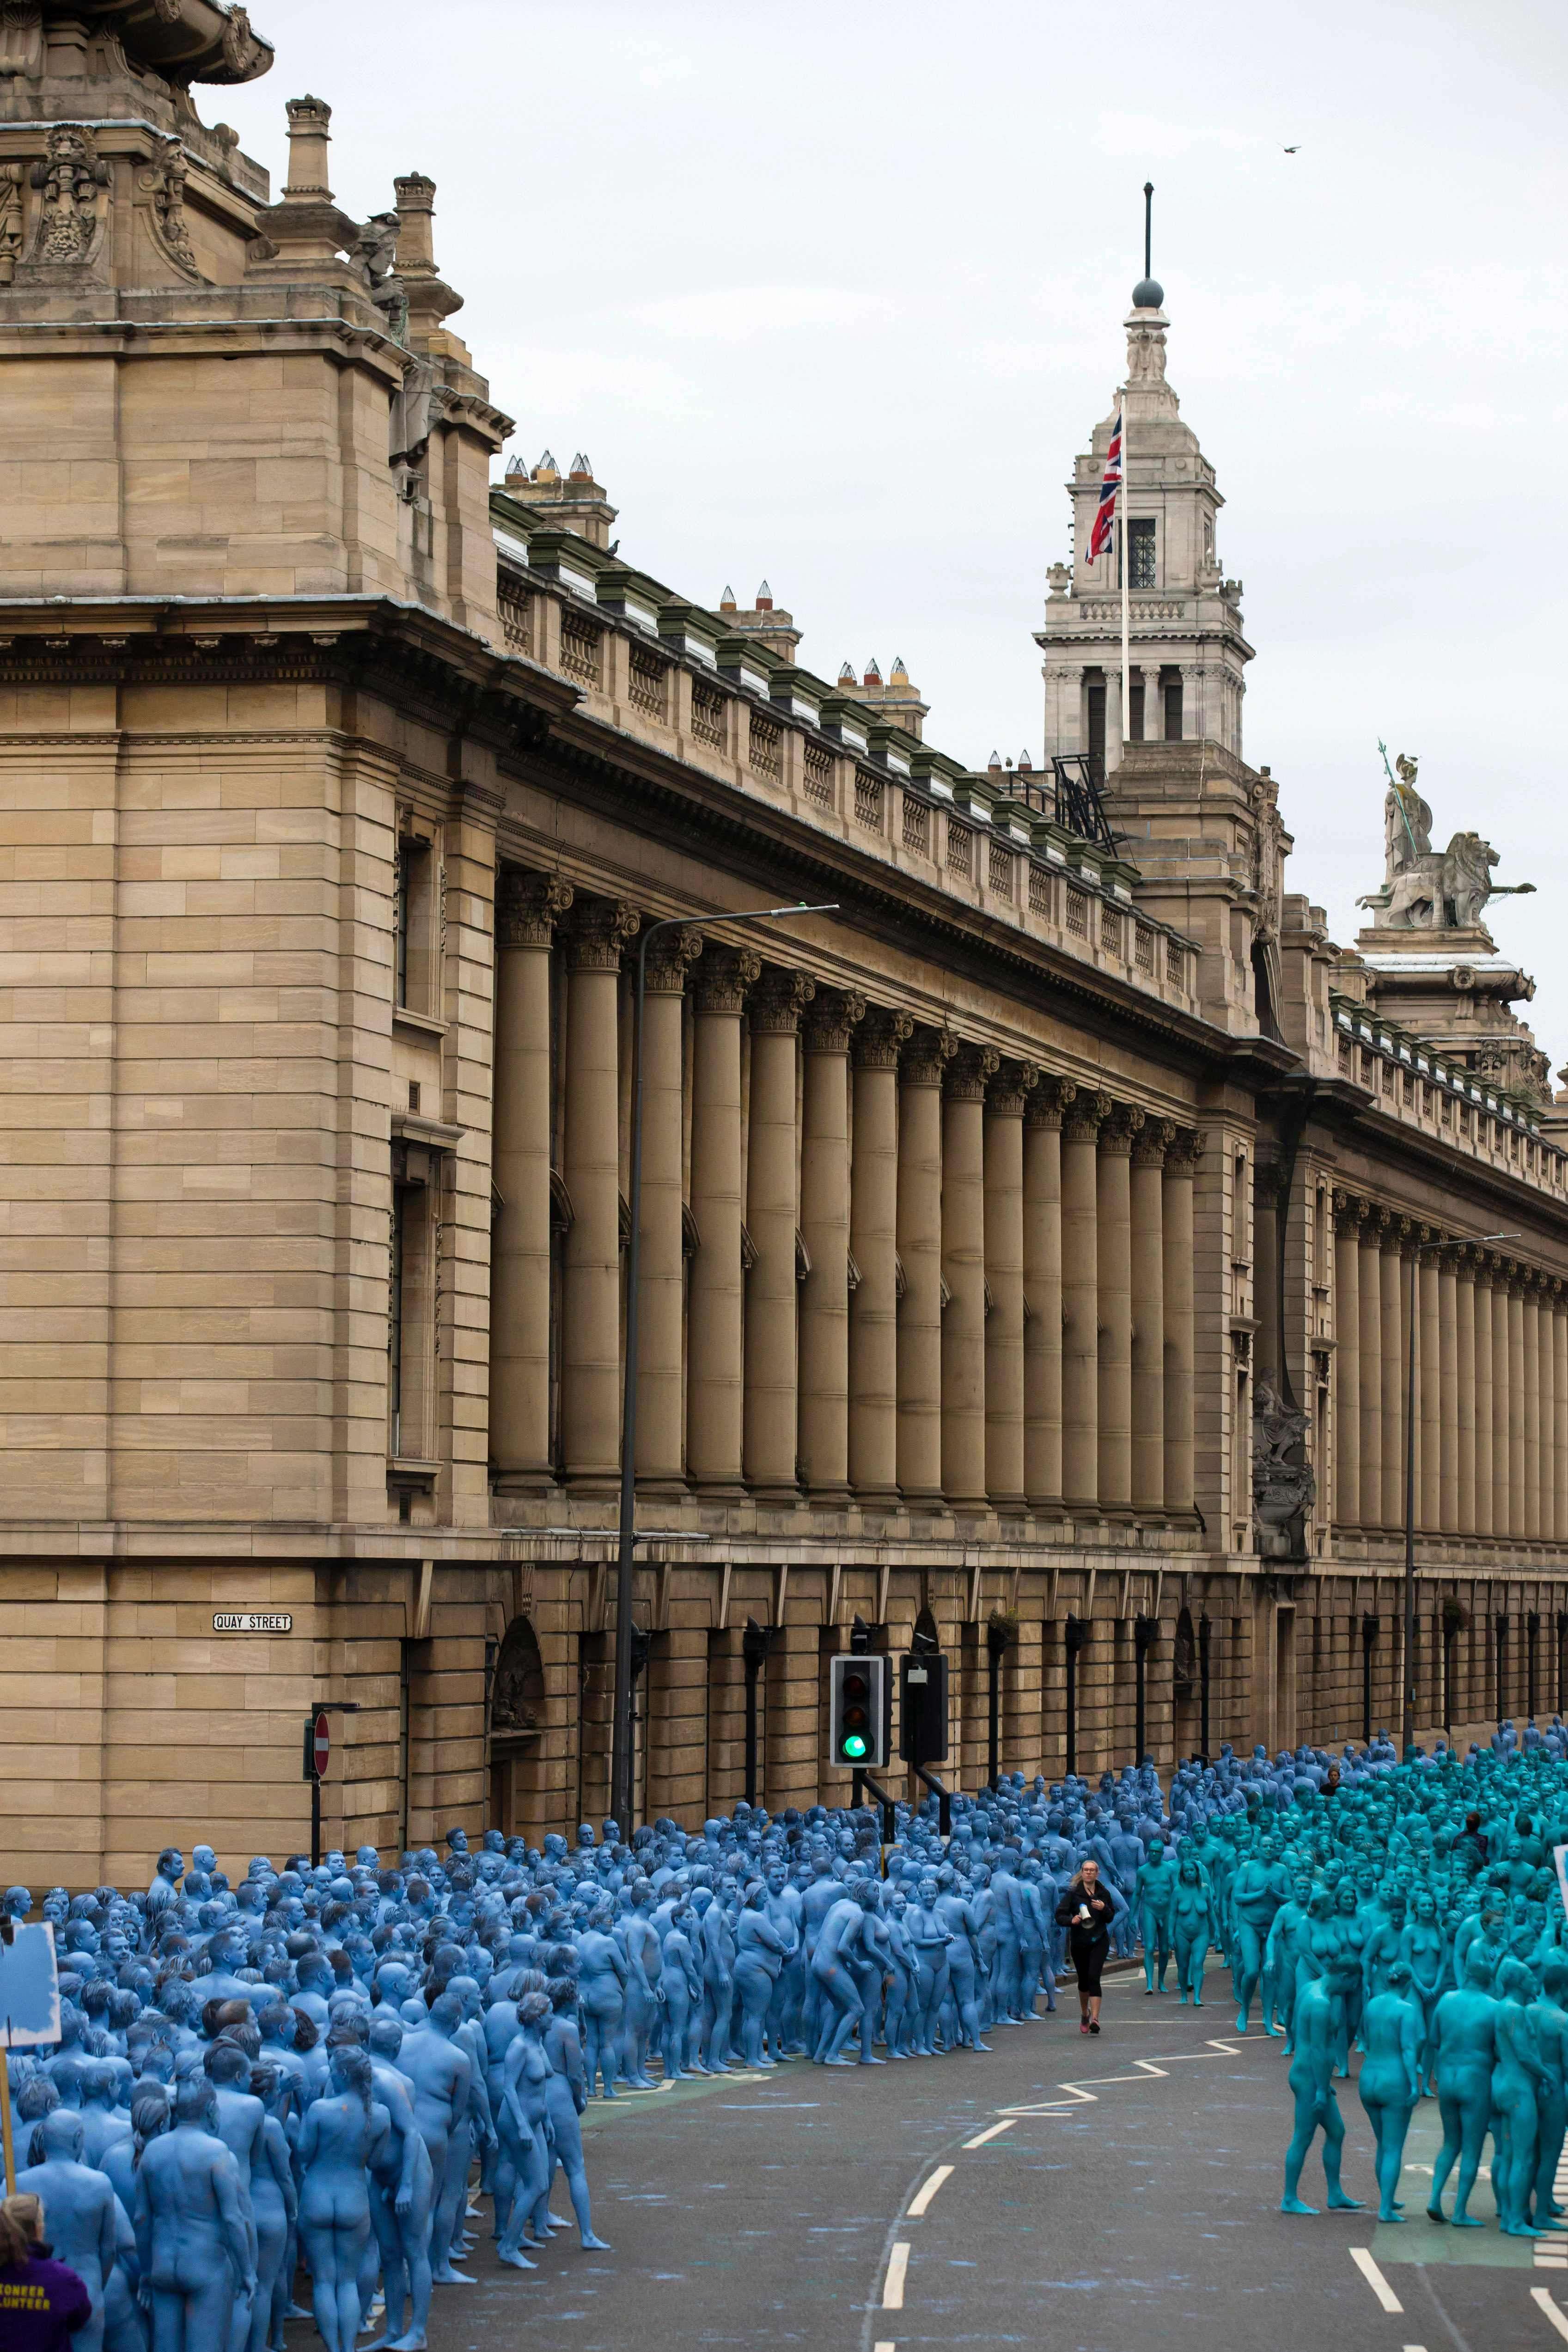 Naked volunteers, painted in blue to reflect the colours found in Marine paintings in Hull's Ferens Art Gallery, prepare to participate in US artist, Spencer Tunick's "Sea of Hull" installation in Kingston upon Hull on July 9, 2016. Over a period of 20 years, the New York based artist has created over 90 art installations in some of the most culturally significant places and landmarks around the world including the Sydney Opera House, Place des Arts in Montreal, Mexico City, Ernest Happel Stadium in Vienna and Munich in Germany. / AFP PHOTO / JON SUPER / RESTRICTED TO EDITORIAL USE - MANDATORY MENTION OF THE ARTIST UPON PUBLICATION - TO ILLUSTRATE THE EVENT AS SPECIFIED IN THE CAPTION - NO CLOSE UP SHOTS TO BE REPRODUCED OF INDIVIDUALS INVOLVED IN THE INSTALLATION